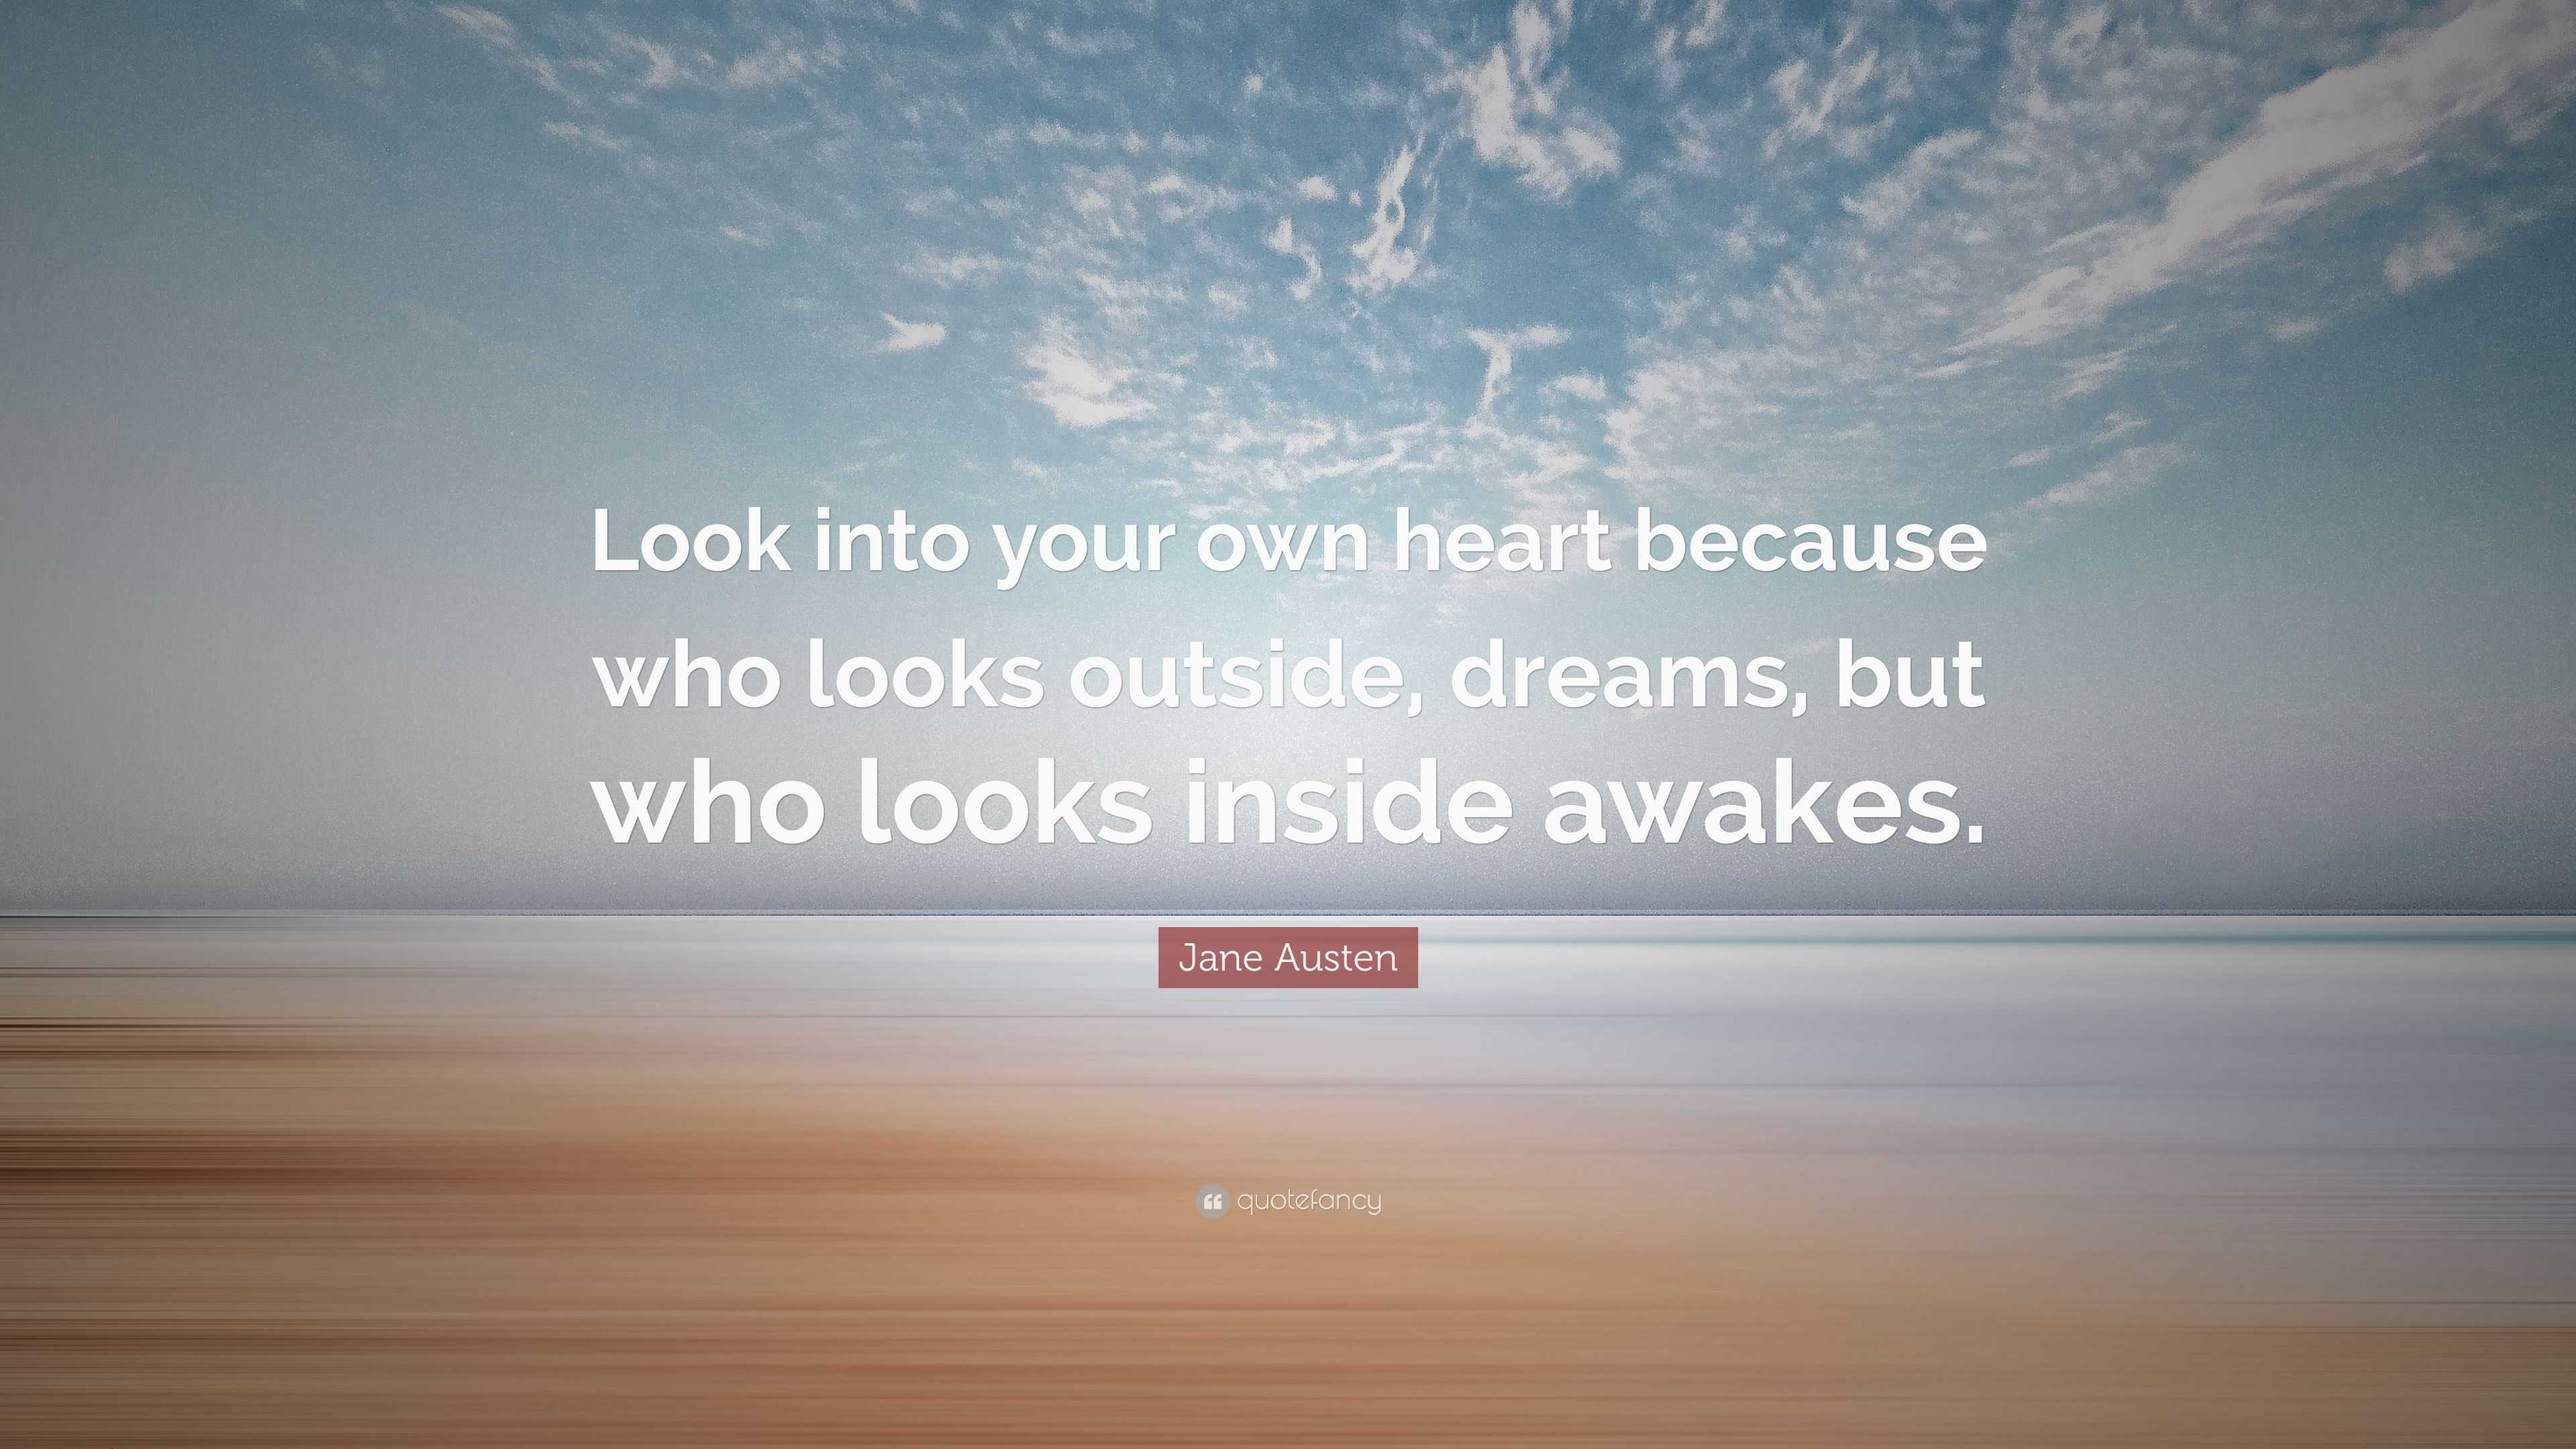 Jane Austen Quote: “Look into your own heart because who looks outside ...